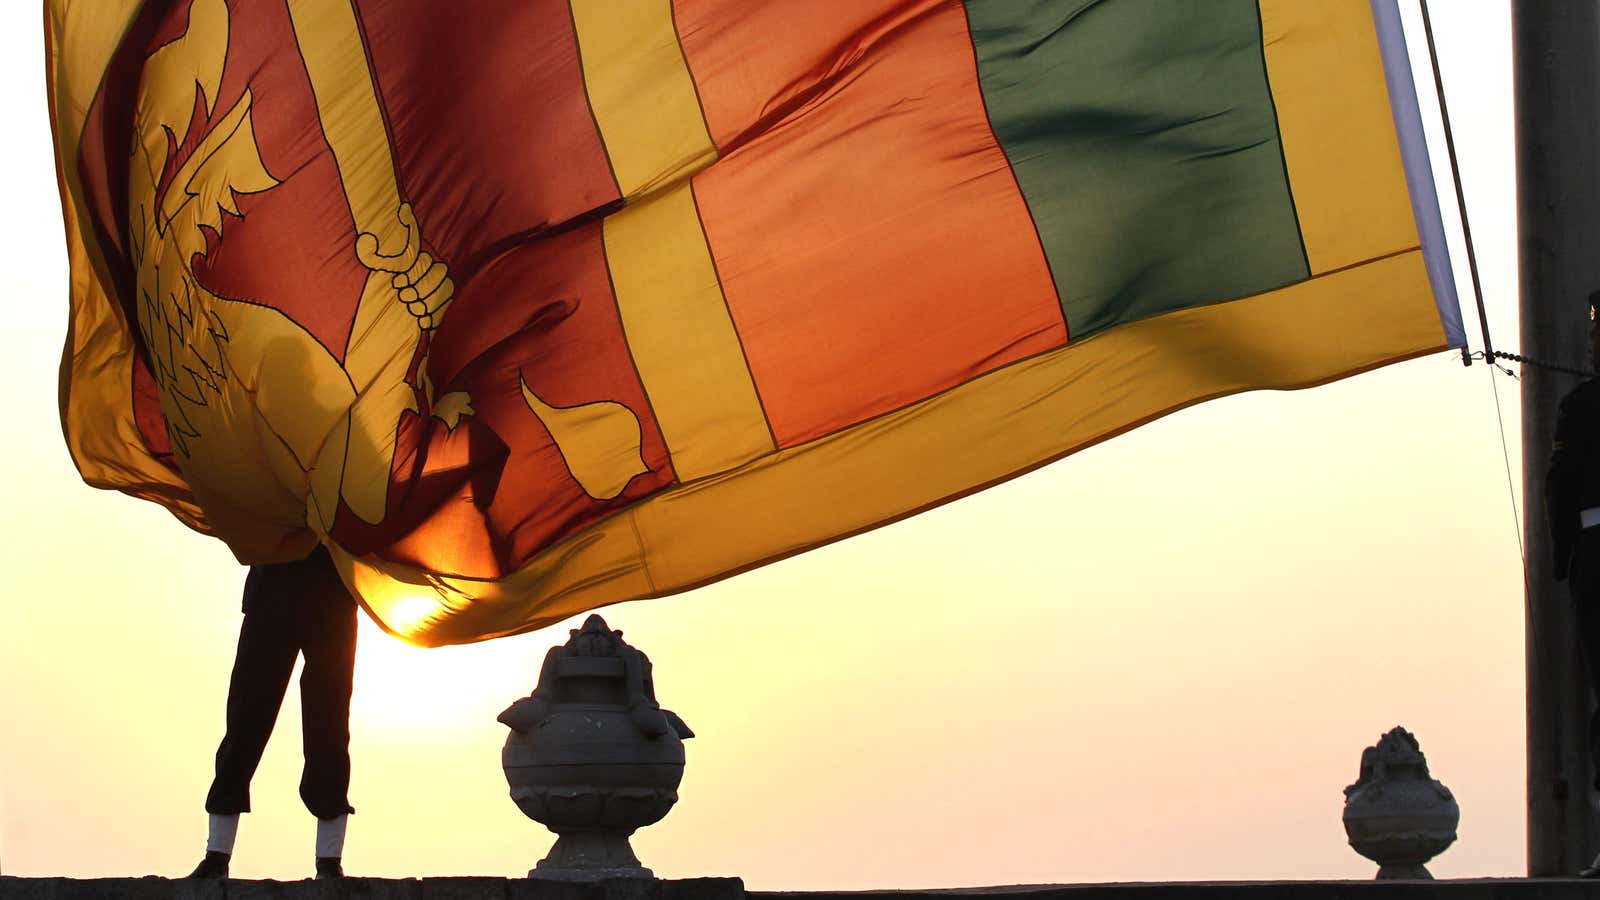 Could Indian states face an economic crisis like Sri Lanka’s?